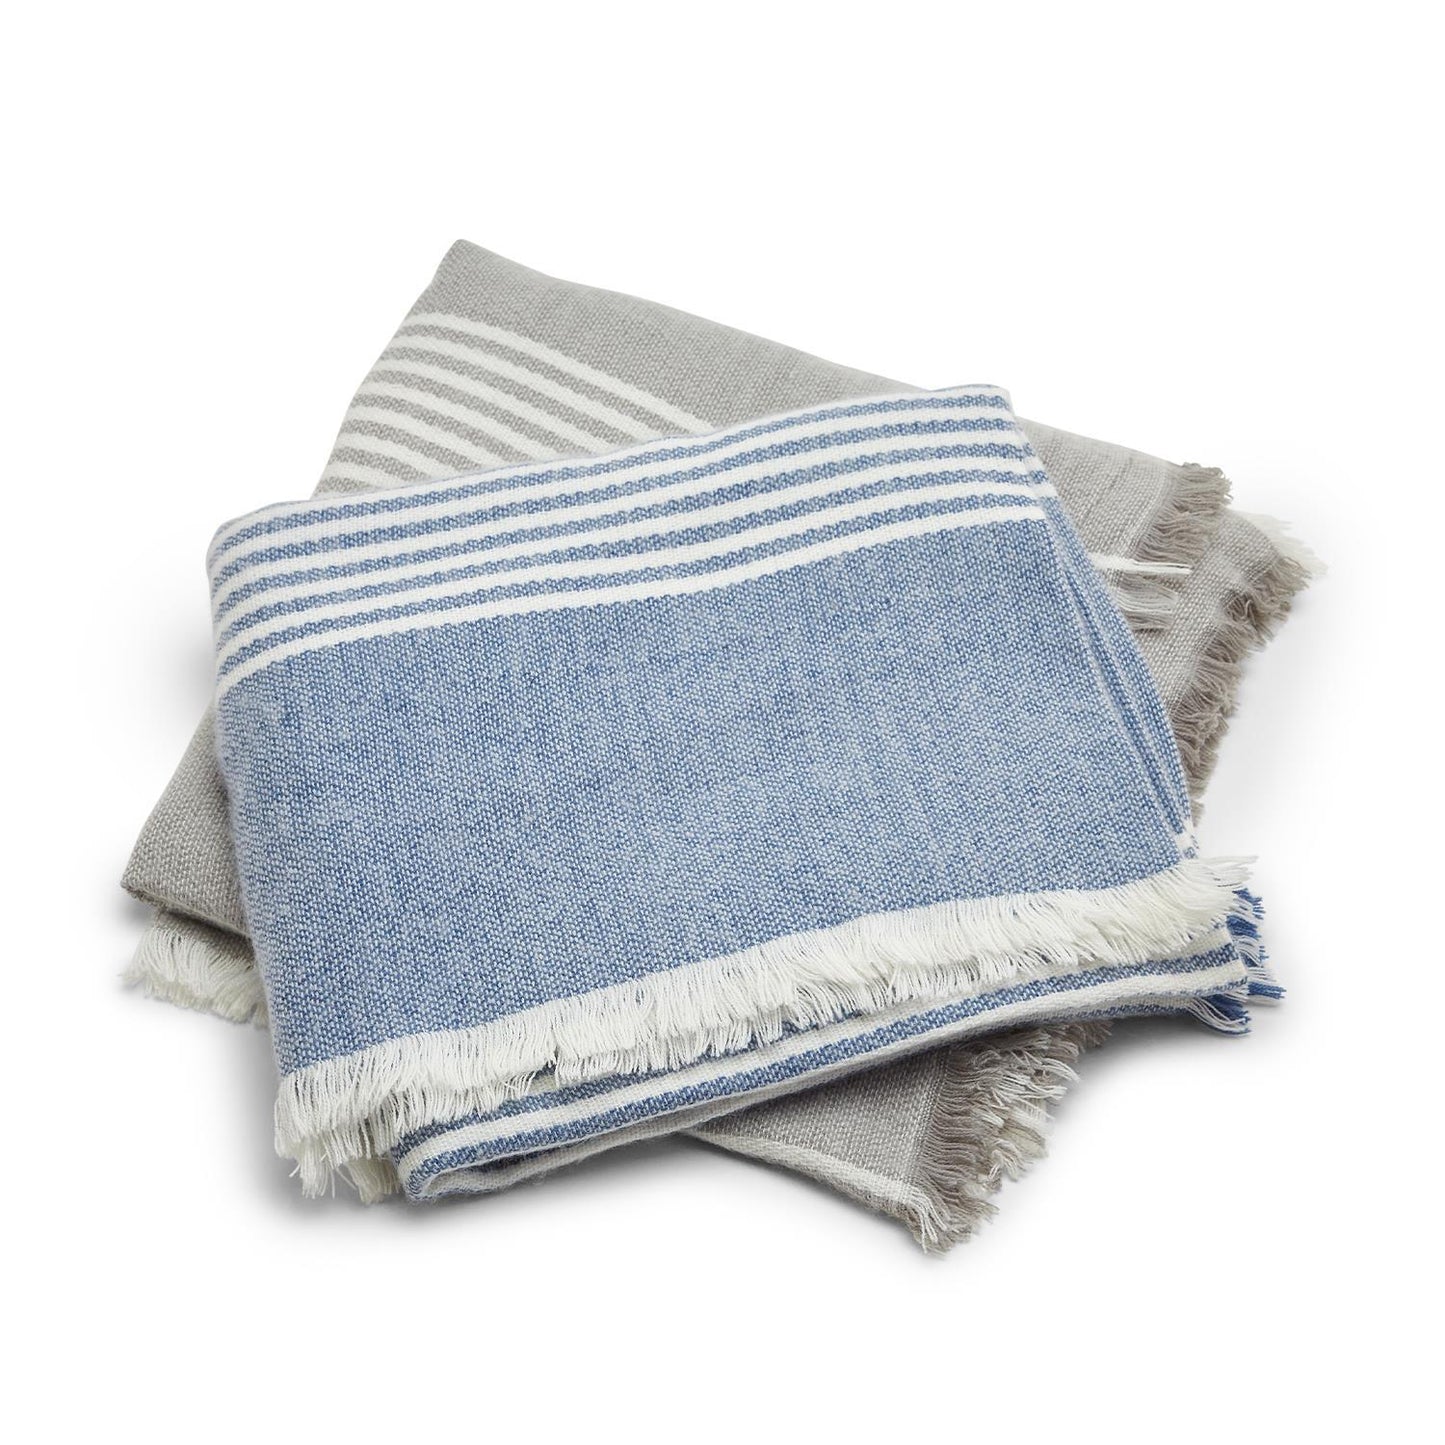 Cozy Comfort Super Soft Throw Blanket Set of 2 Assorted 2 Colors, Gray & Blue